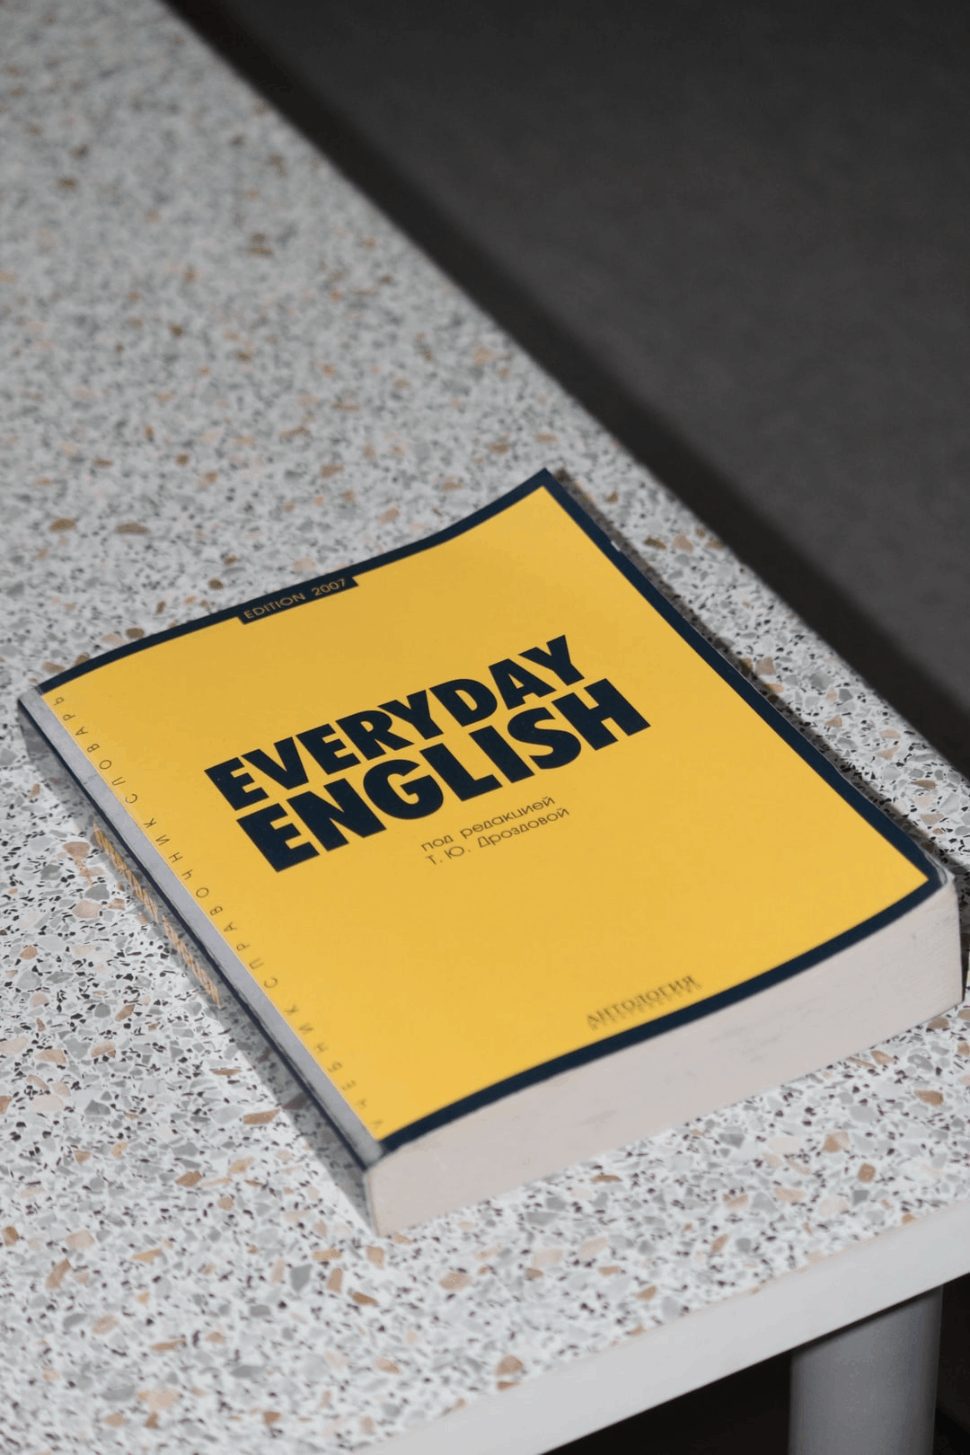 A yellow covered English learning book titled 